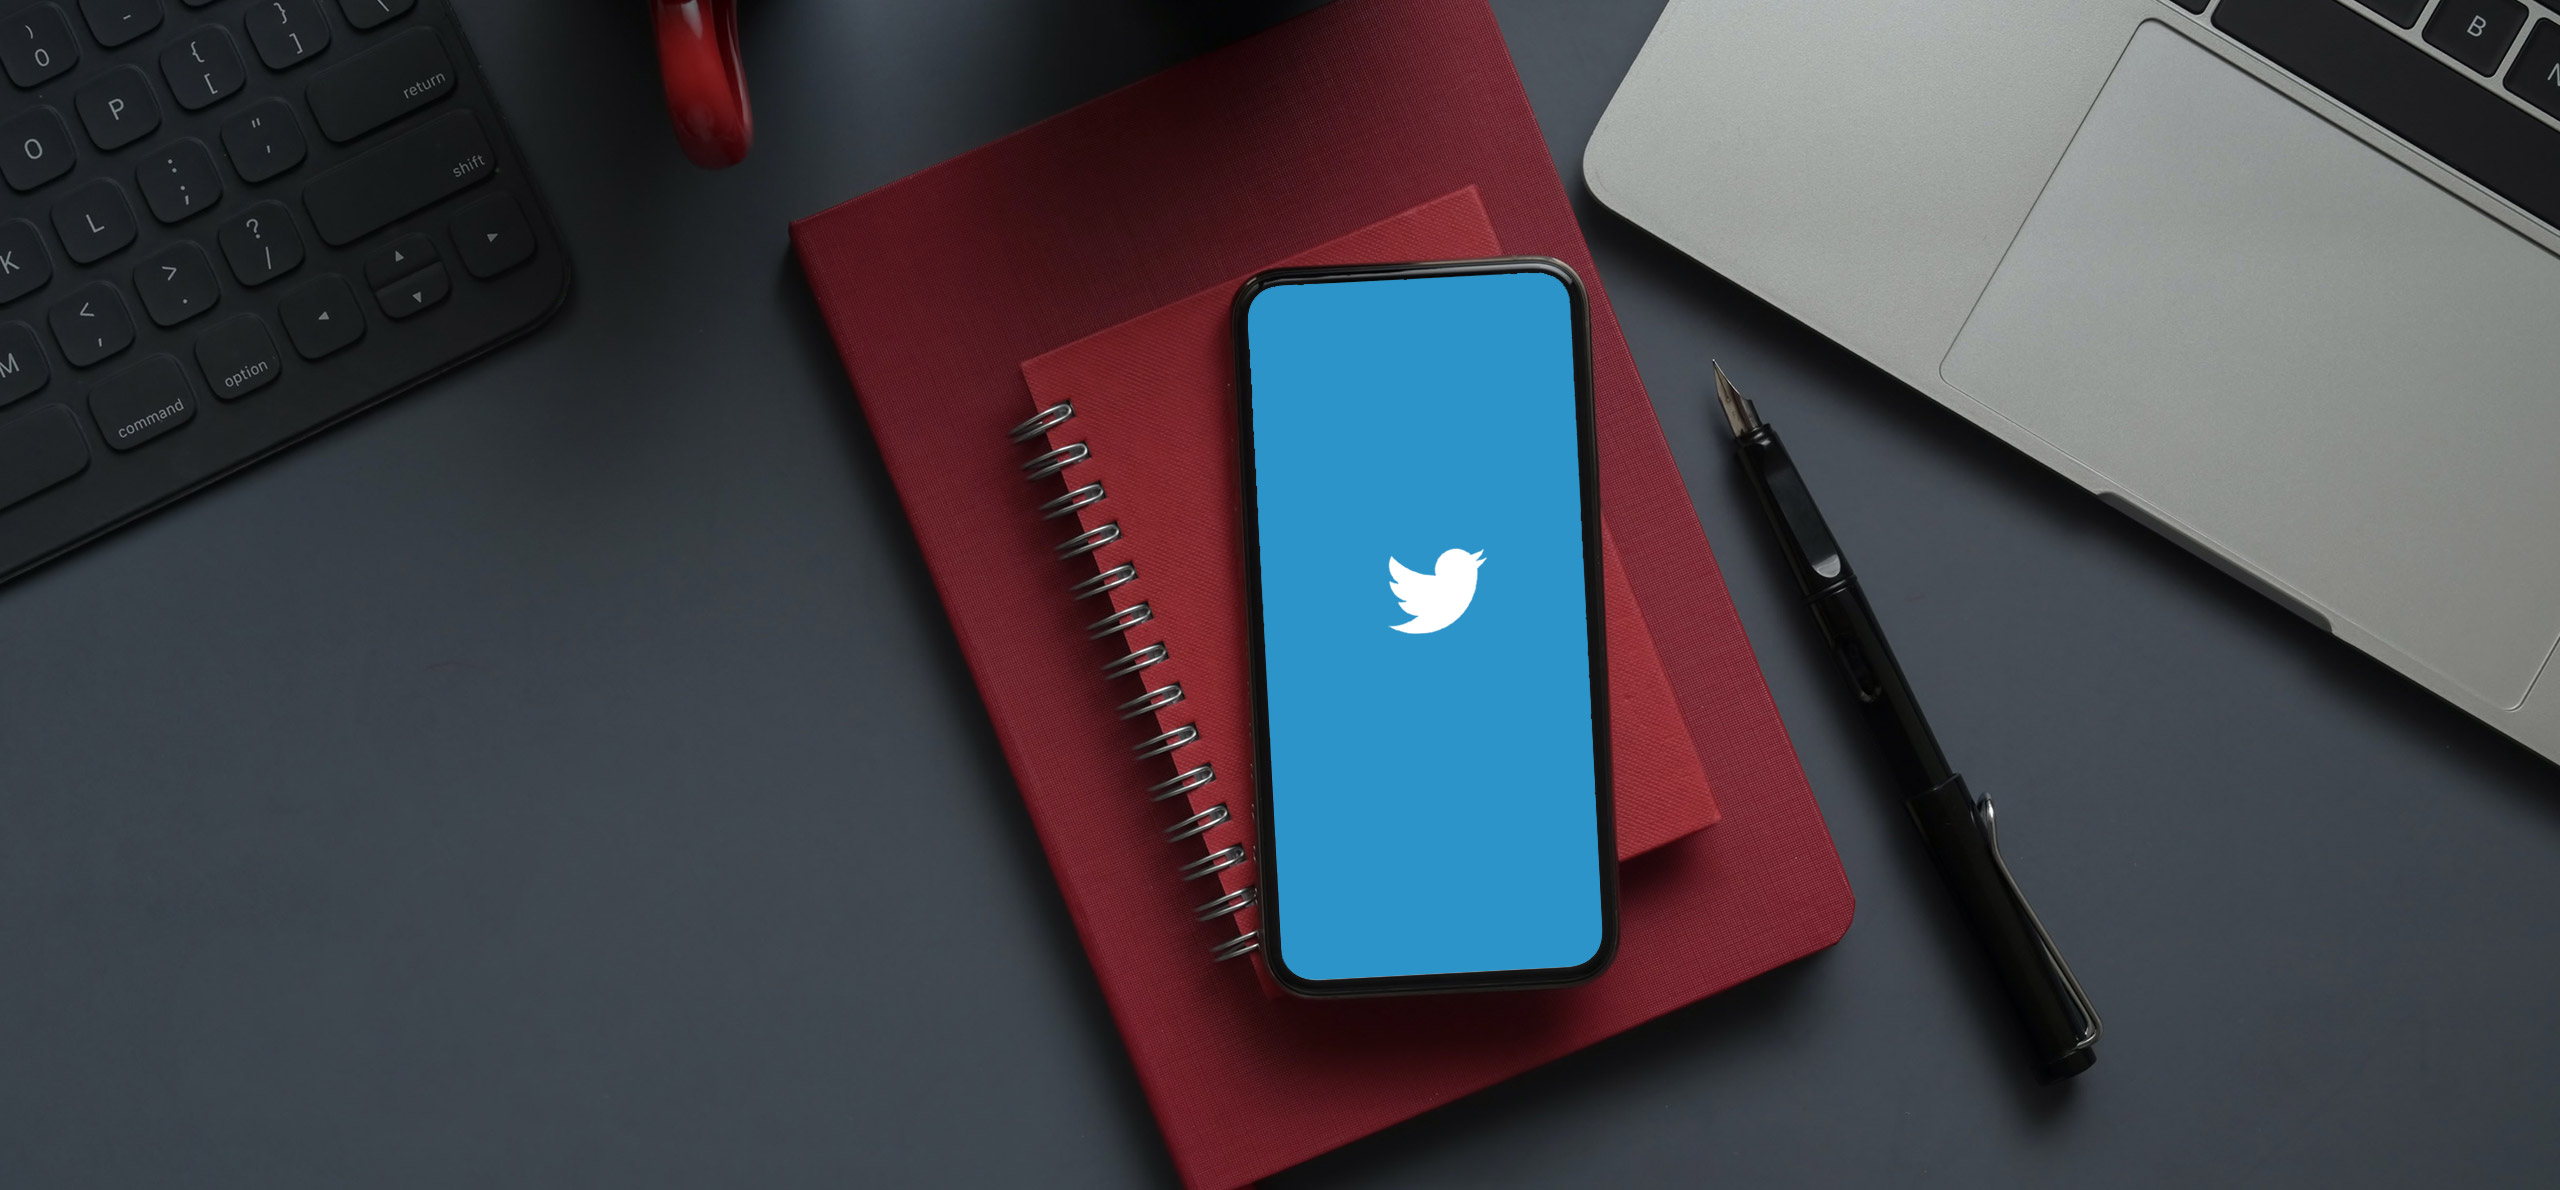 6 Creative ideas for a high impact Twitter campaign